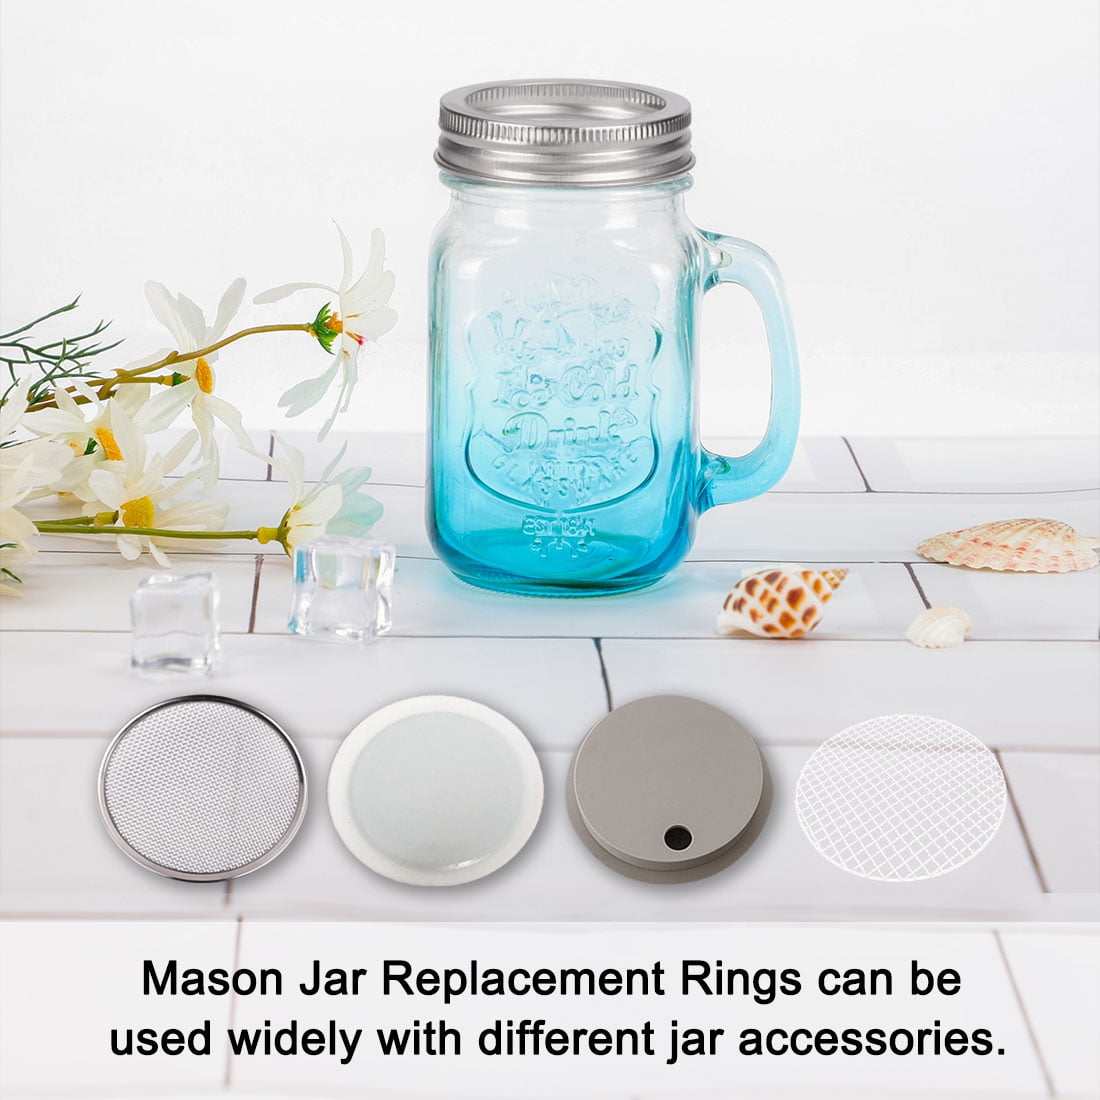 sourcing map 6pcs Stainless Steel Regular Mouth 2.76 Inch Dia Mason Jar Replacement Rings Rust Resistant Non-Split Ring for Mason Jar Ball Jar Canning Jars Silver Tone 